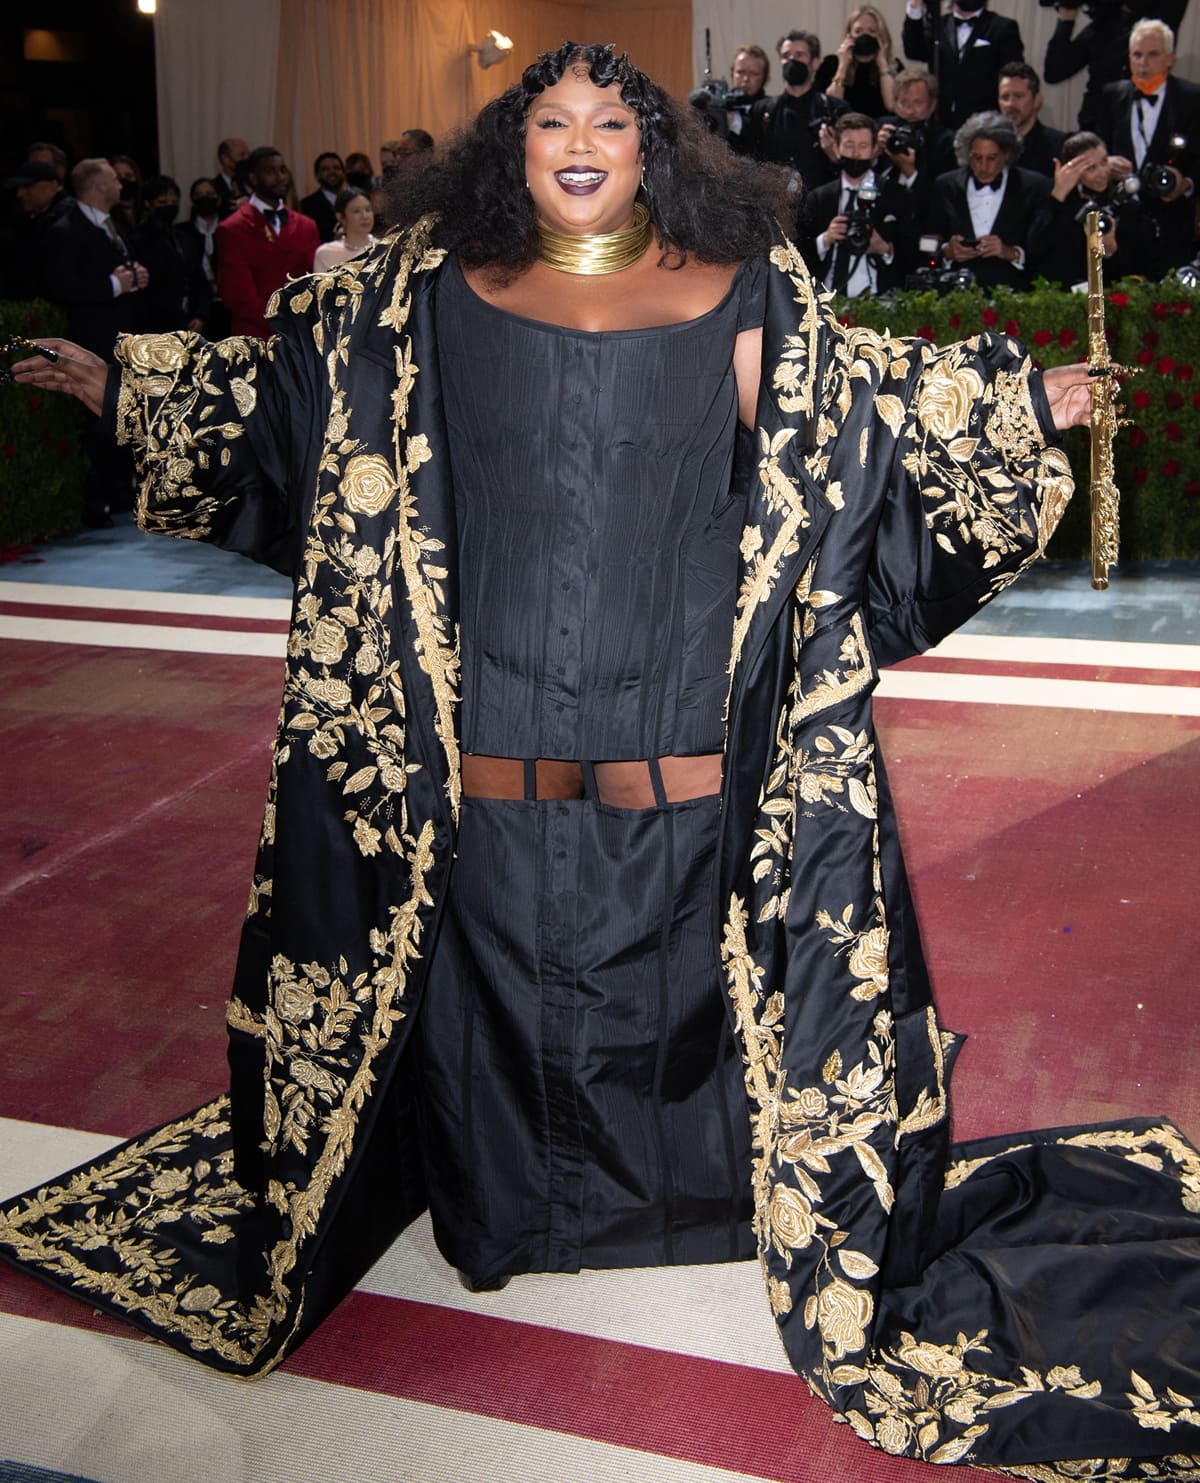 Lizzo wears a custom outfit by Thom Browne to "In America: An Anthology of Fashion," the 2022 Costume Institute Benefit at The Metropolitan Museum of Art